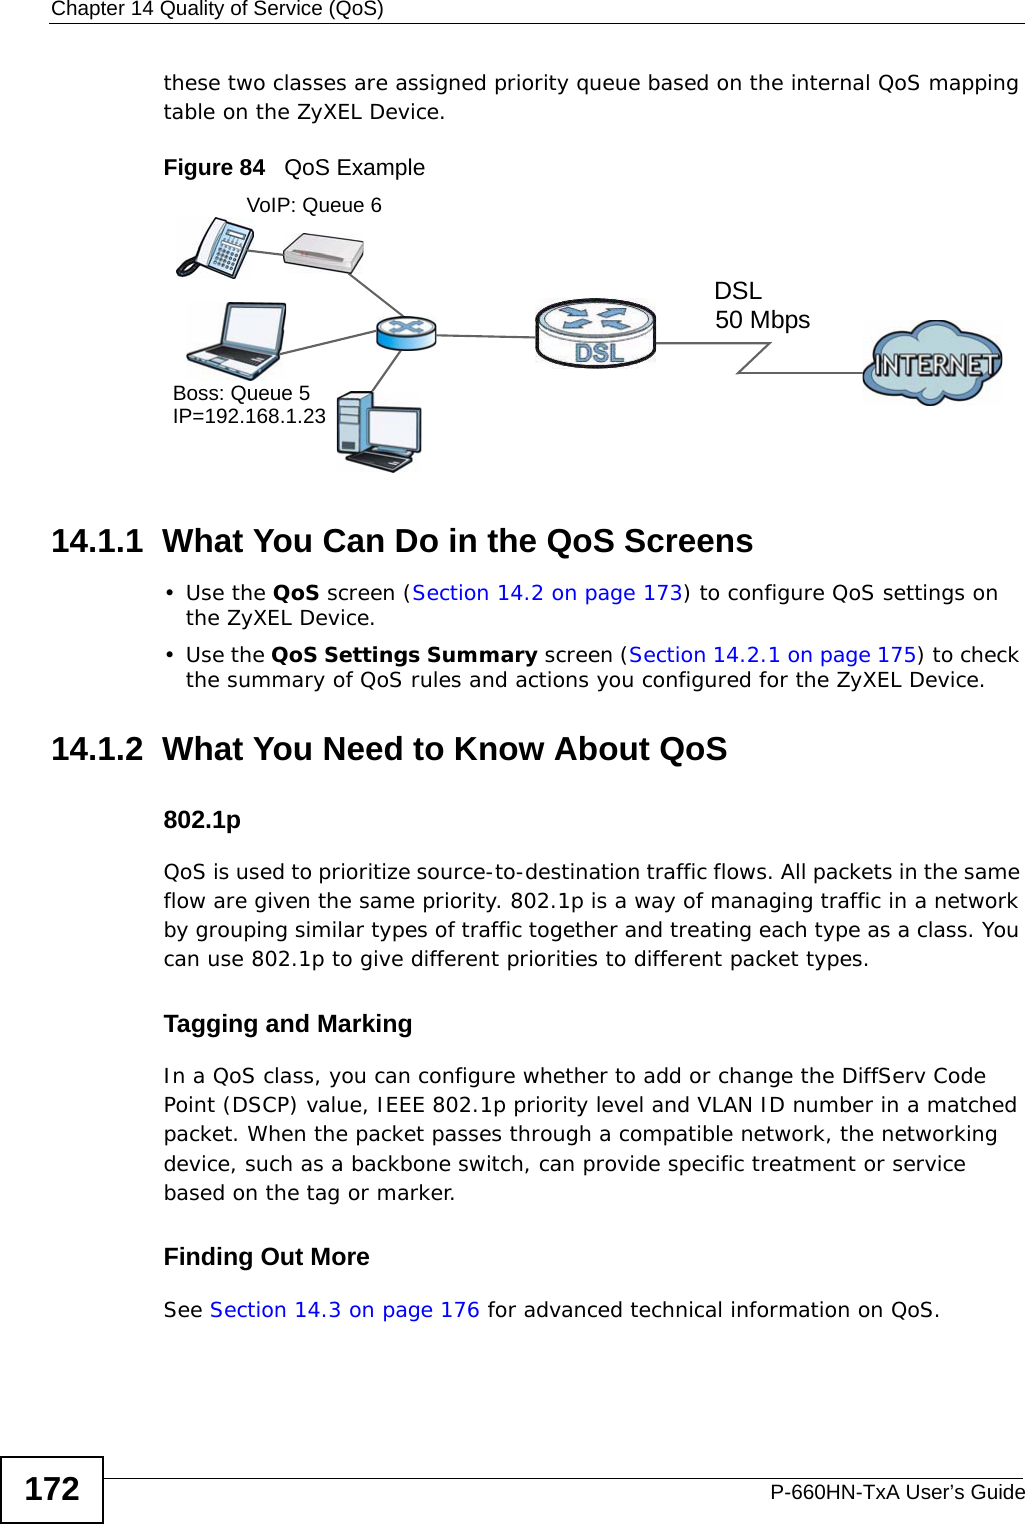 Chapter 14 Quality of Service (QoS)P-660HN-TxA User’s Guide172these two classes are assigned priority queue based on the internal QoS mapping table on the ZyXEL Device.Figure 84   QoS Example14.1.1  What You Can Do in the QoS Screens•Use the QoS screen (Section 14.2 on page 173) to configure QoS settings on the ZyXEL Device.•Use the QoS Settings Summary screen (Section 14.2.1 on page 175) to check the summary of QoS rules and actions you configured for the ZyXEL Device.14.1.2  What You Need to Know About QoS802.1pQoS is used to prioritize source-to-destination traffic flows. All packets in the same flow are given the same priority. 802.1p is a way of managing traffic in a network by grouping similar types of traffic together and treating each type as a class. You can use 802.1p to give different priorities to different packet types. Tagging and MarkingIn a QoS class, you can configure whether to add or change the DiffServ Code Point (DSCP) value, IEEE 802.1p priority level and VLAN ID number in a matched packet. When the packet passes through a compatible network, the networking device, such as a backbone switch, can provide specific treatment or service based on the tag or marker.Finding Out MoreSee Section 14.3 on page 176 for advanced technical information on QoS.50 MbpsDSLVoIP: Queue 6Boss: Queue 5IP=192.168.1.23